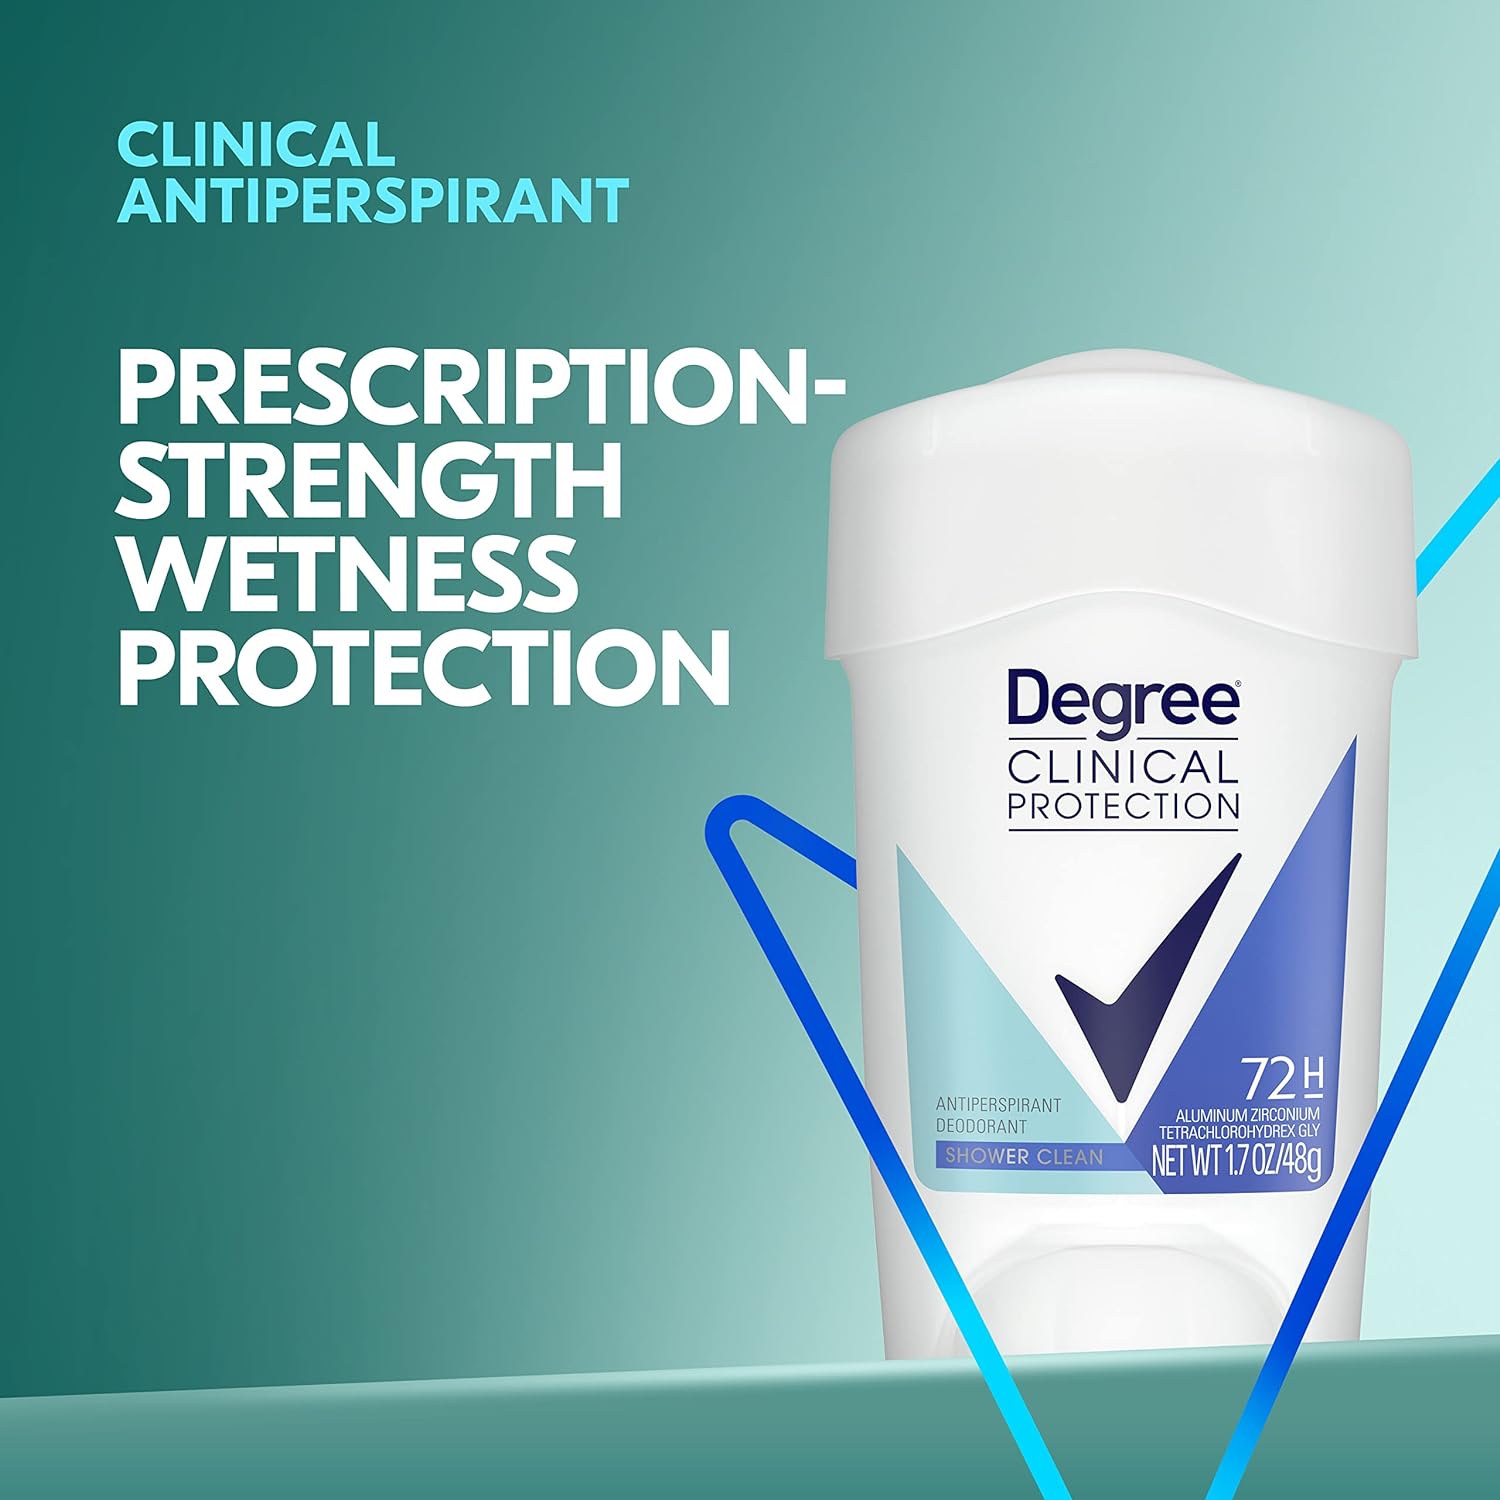 Degree Clinical Protection Antiperspirant Deodorant 72-Hour Sweat & Odor Protection Shower Clean Antiperspirant for Women 1.7 oz